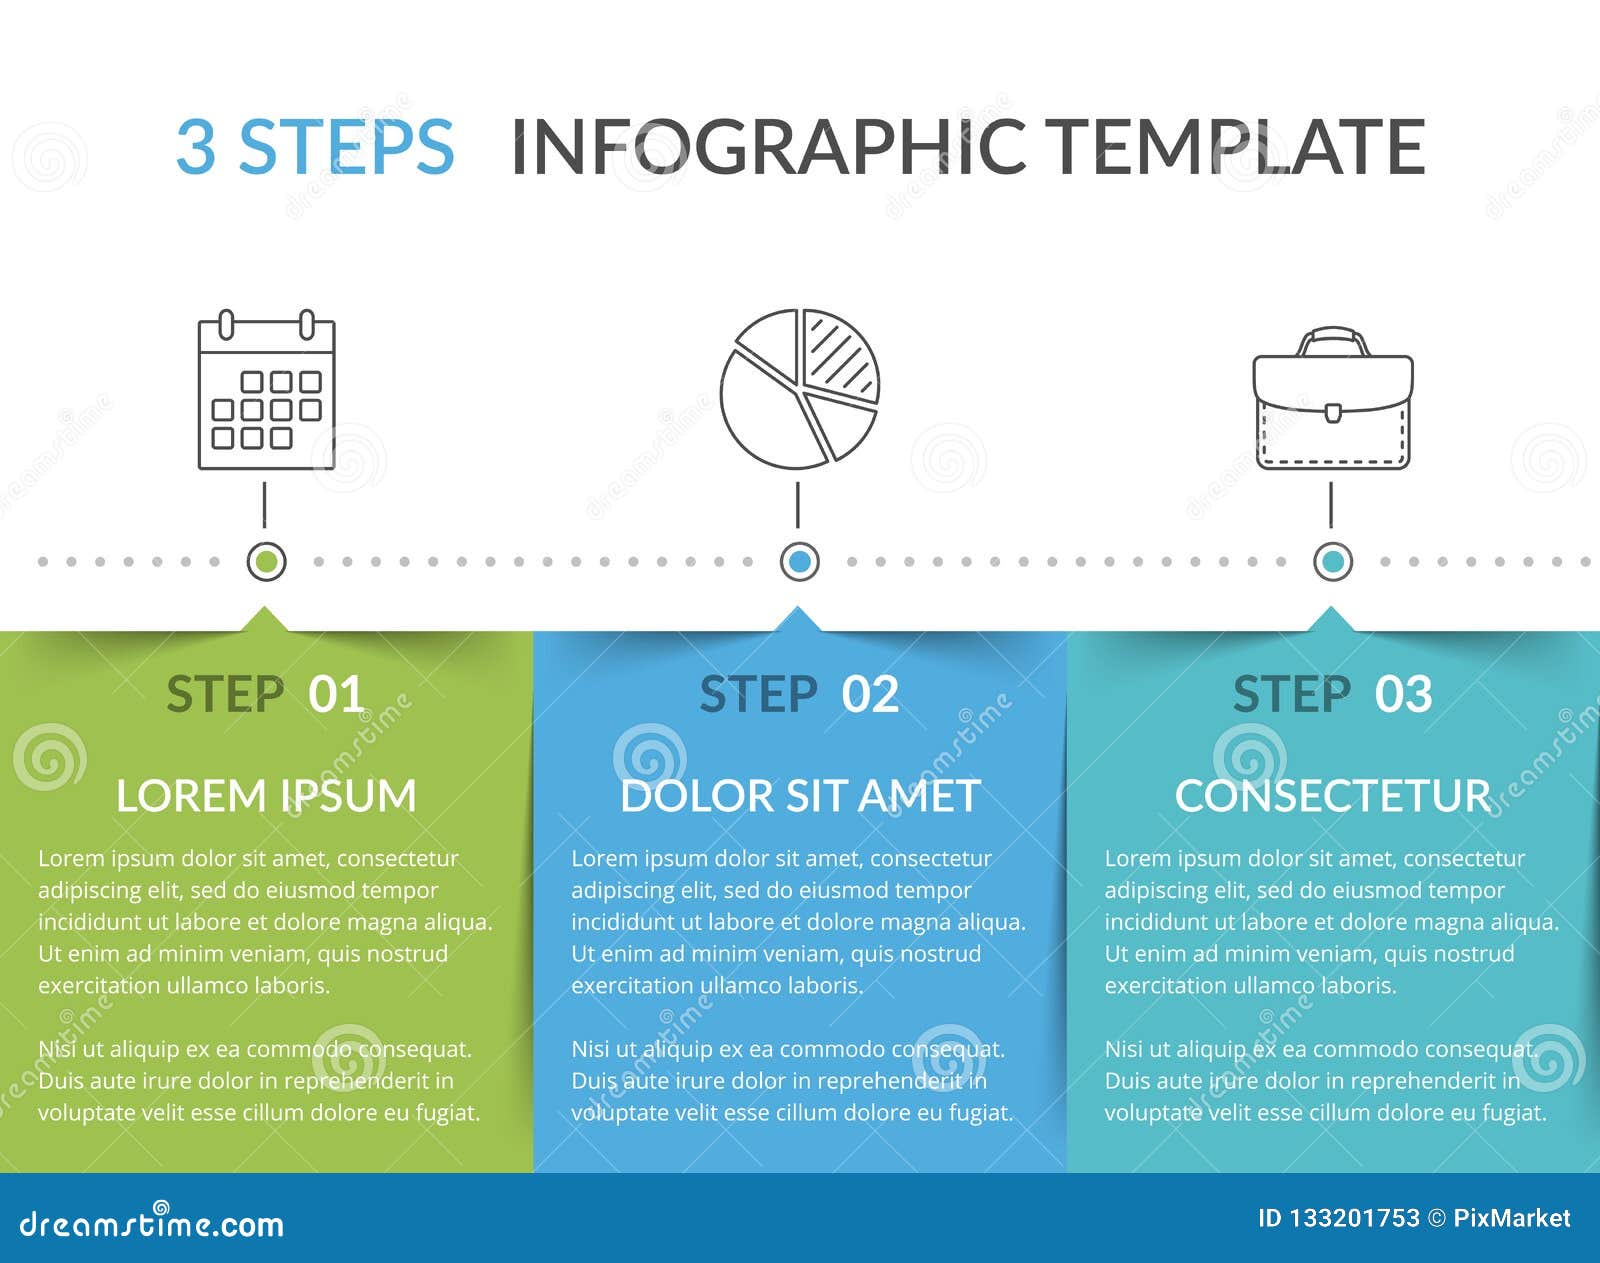 infographic template with 3 steps